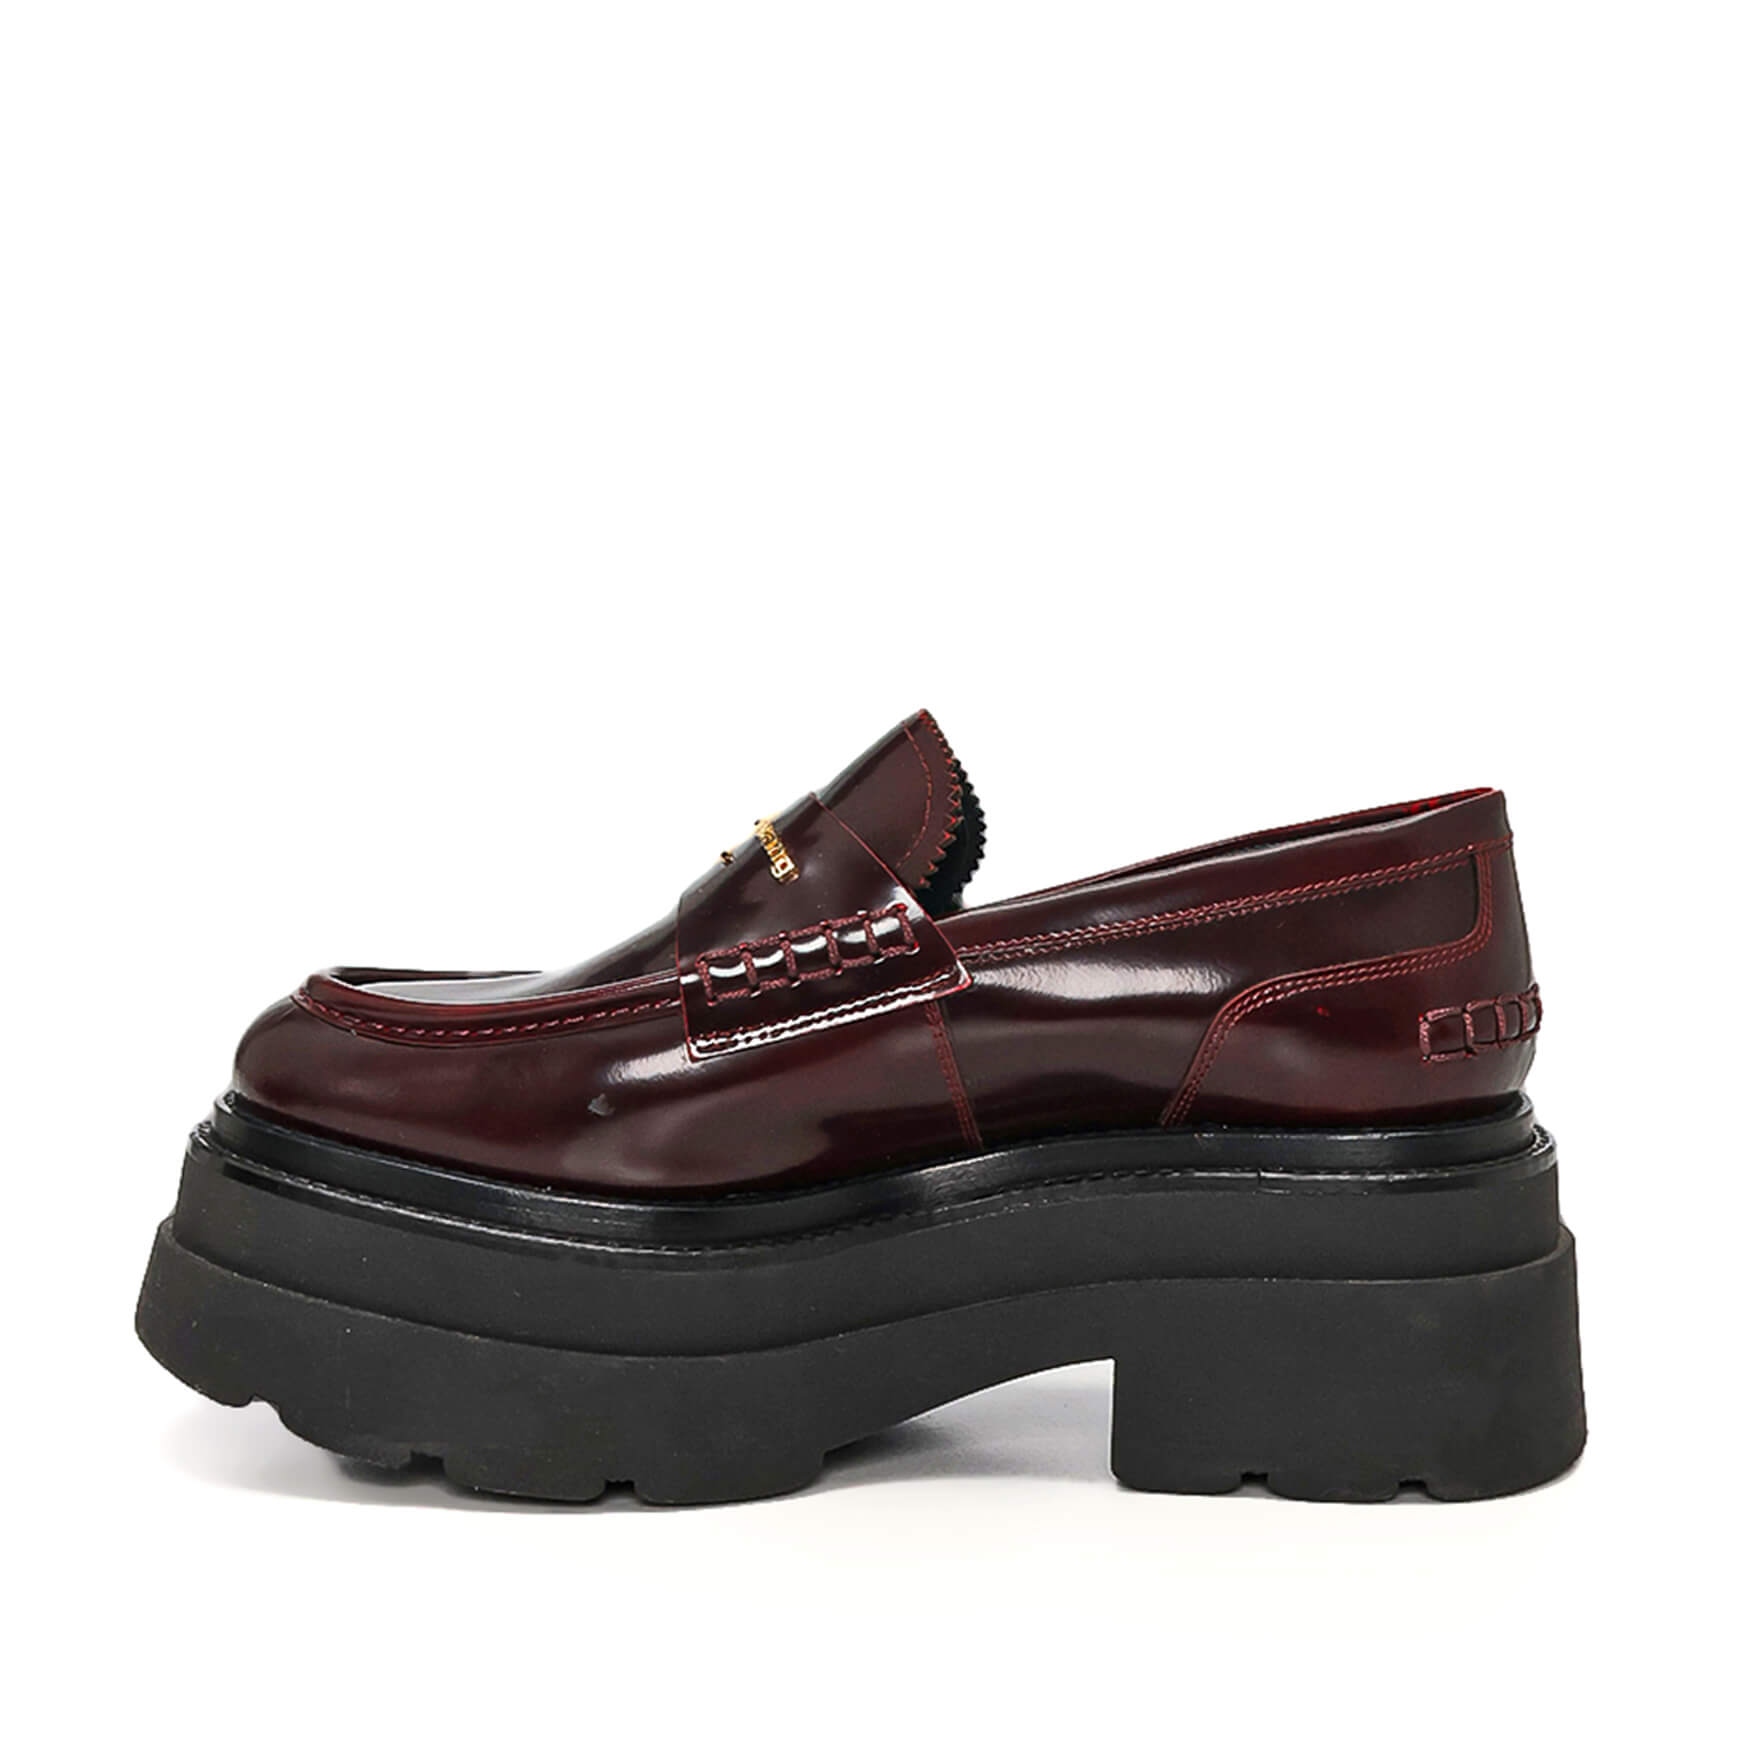 Alexander Wang - Bordeaux Patent Leather Loafers